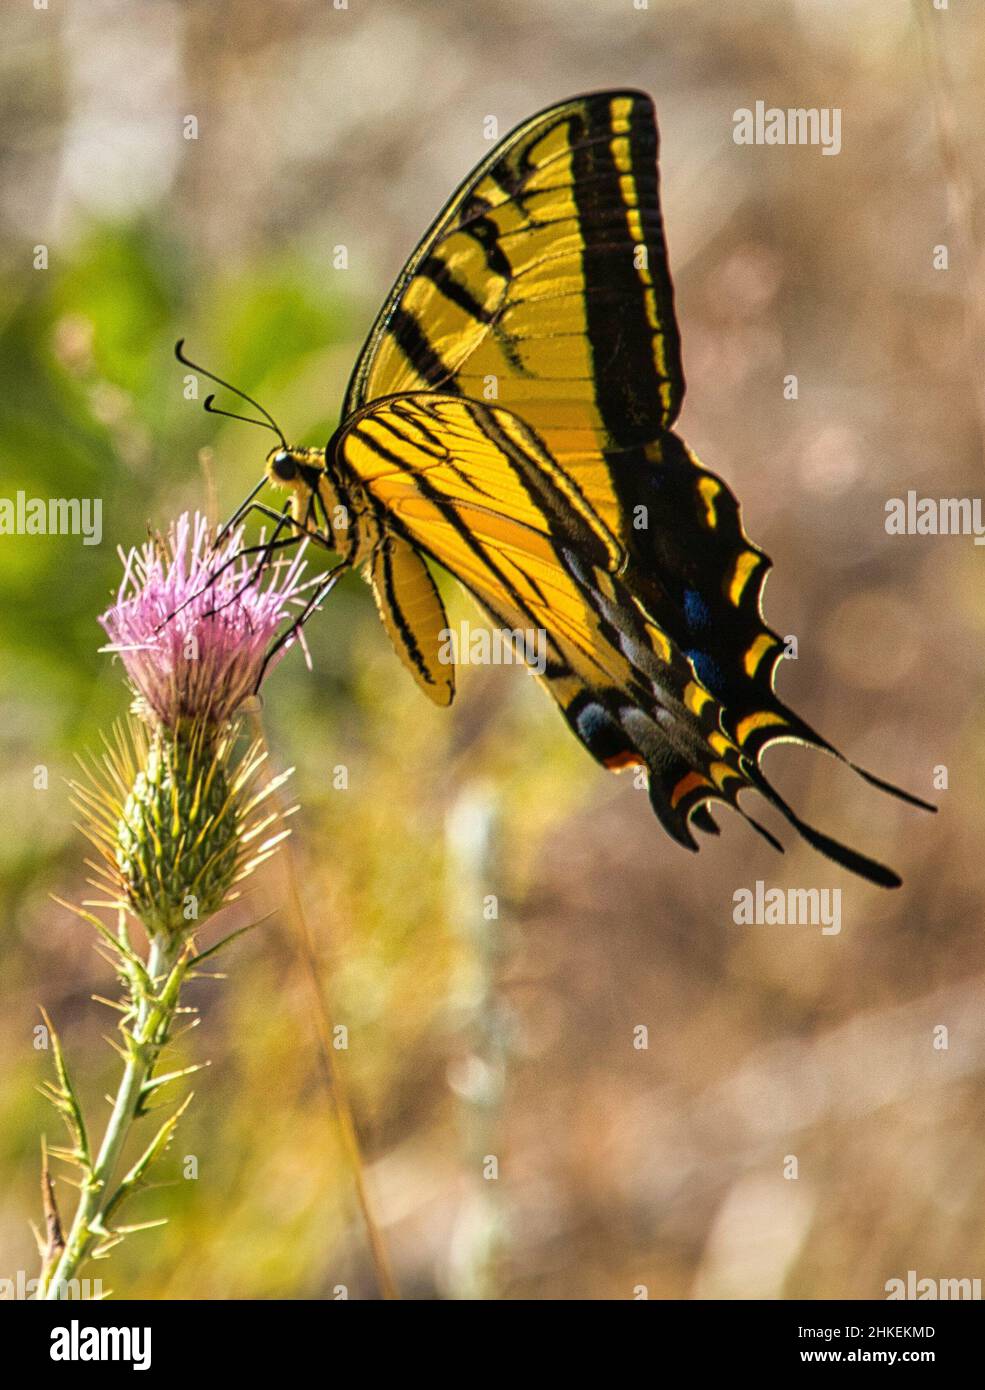 Vertical shot of a yellow butterfly sitting on a Cirsium vulgare flower Stock Photo